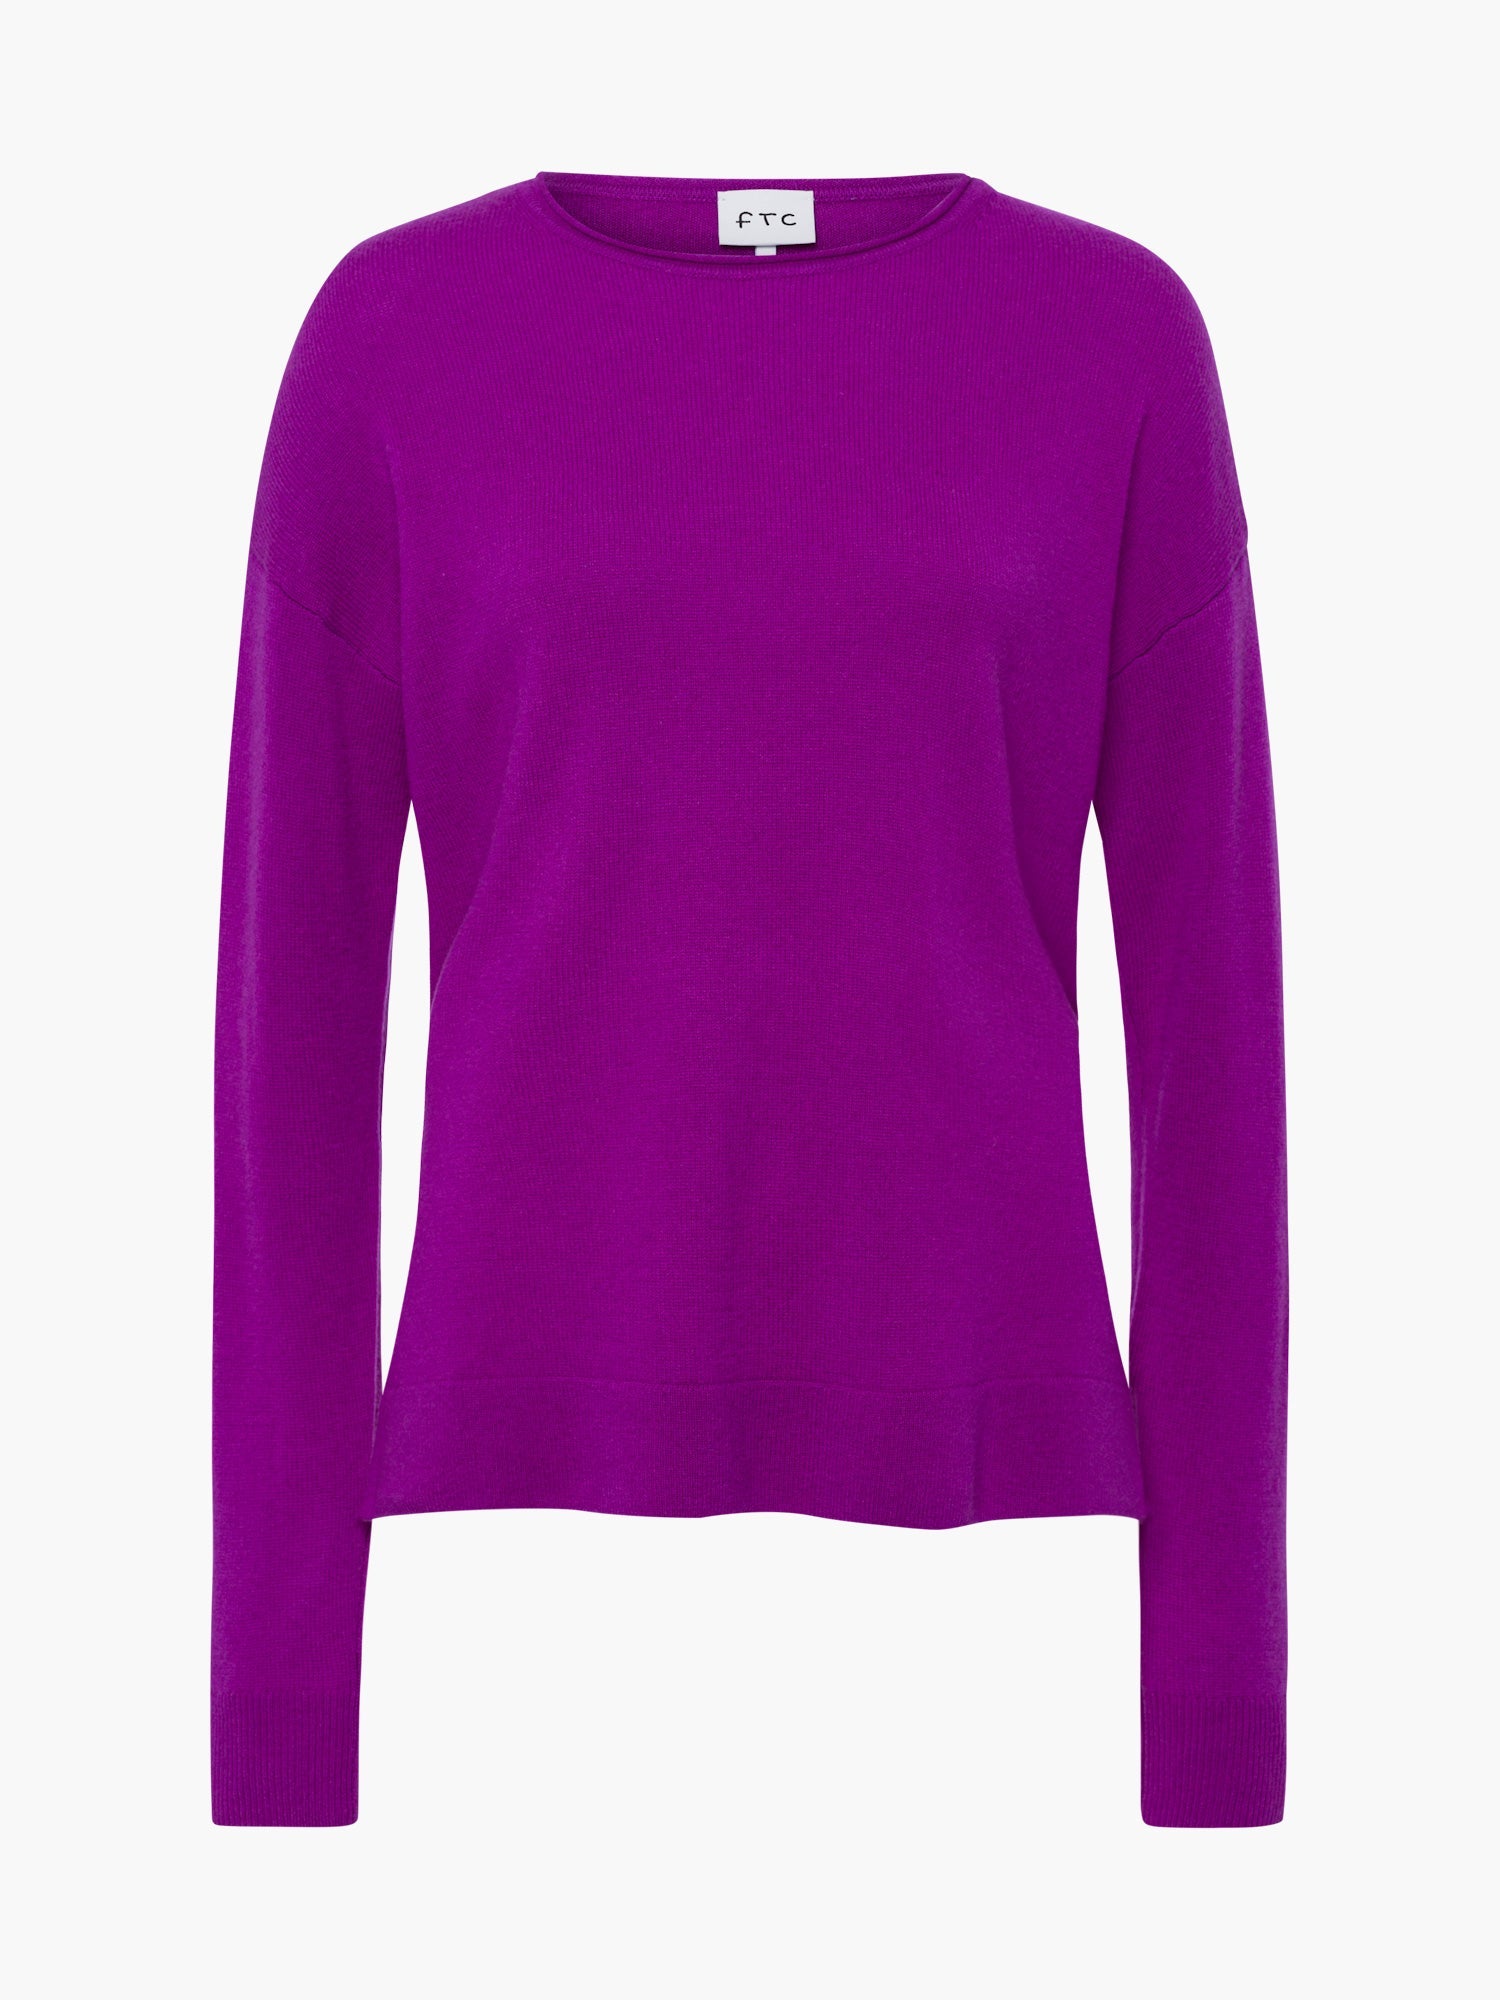 FTC-Cashmere-OUTLET-SALE-Pullover-RN-Strick-ARCHIVE-COLLECTION_5ac7497c-a9a3-4357-8ba0-34da9351db72.jpg